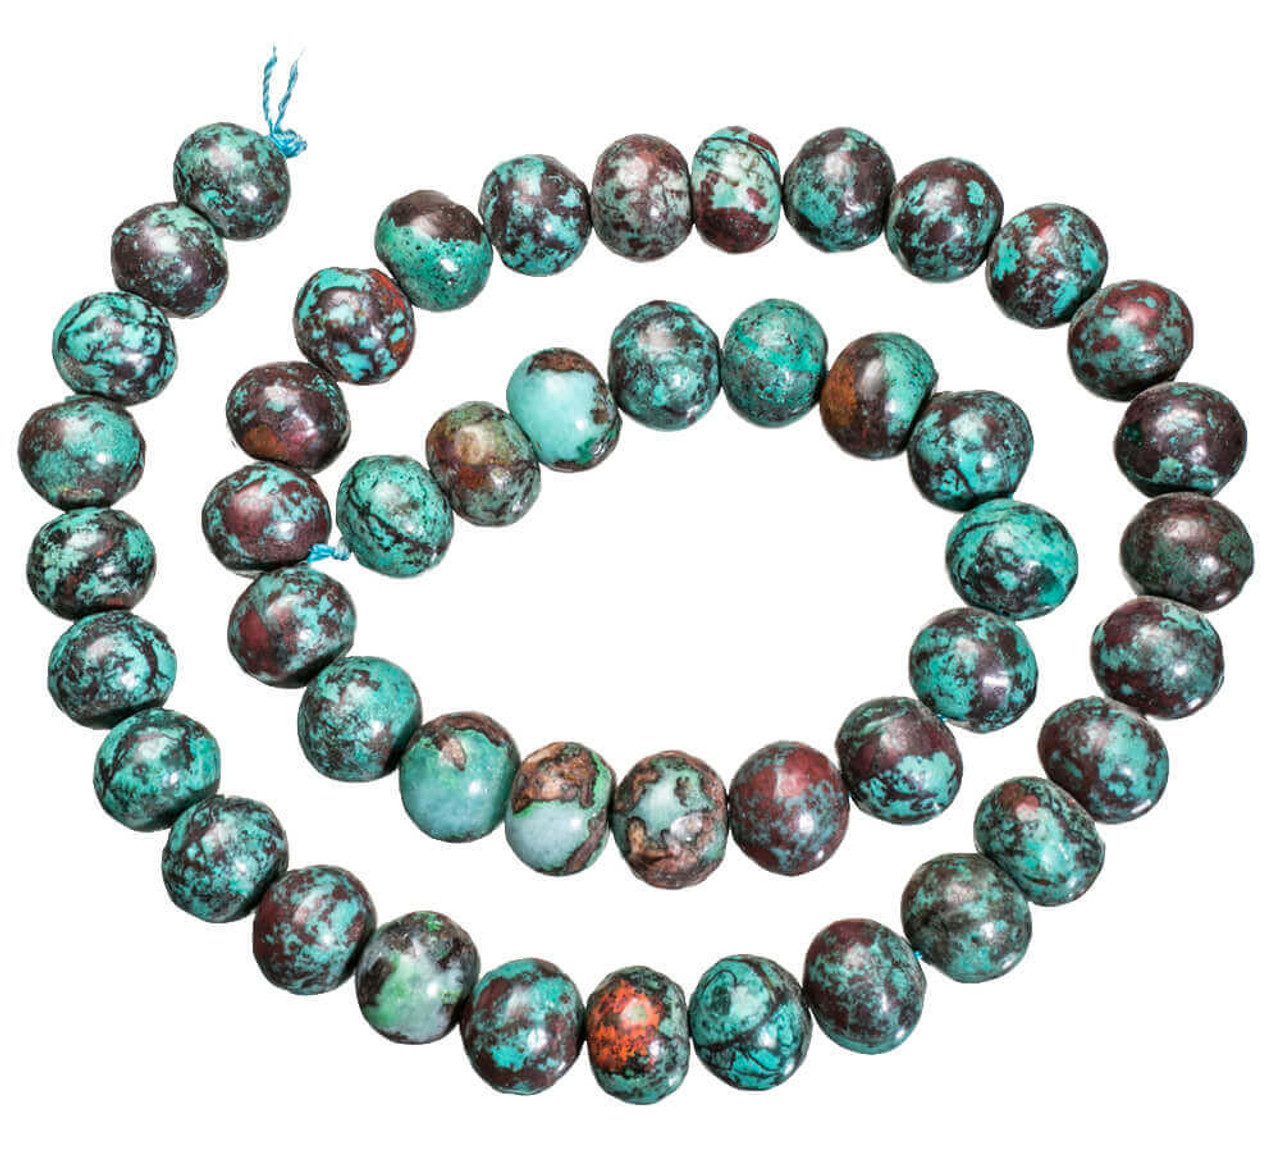 Beads Silicated Chrysocolla - 10mm Rondell SC1 